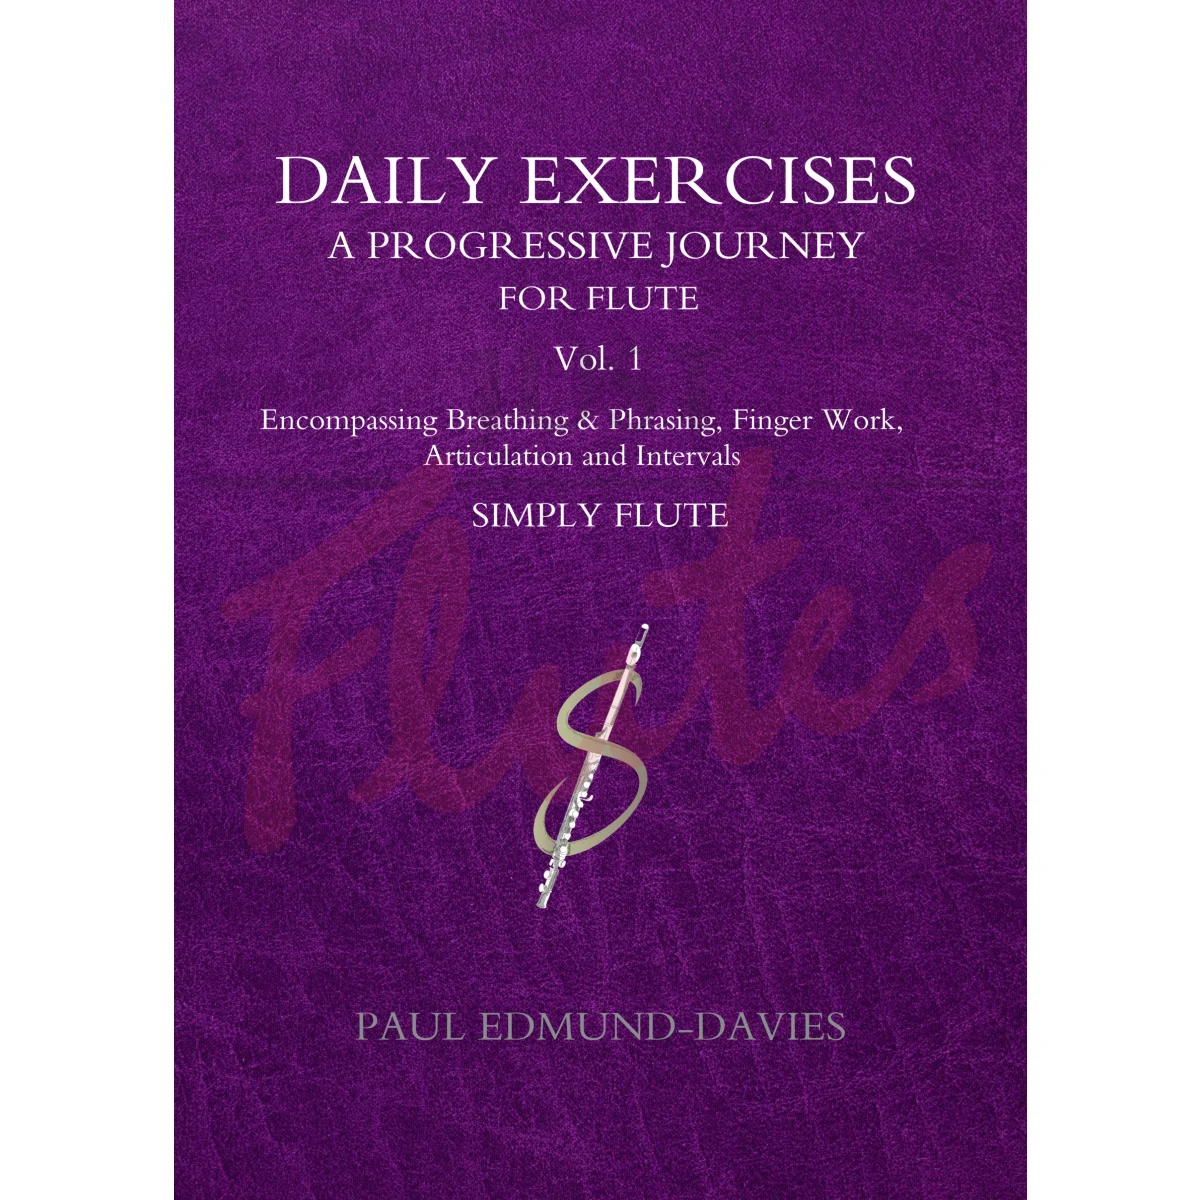 Daily Exercises: A Progressive Journey for Flute